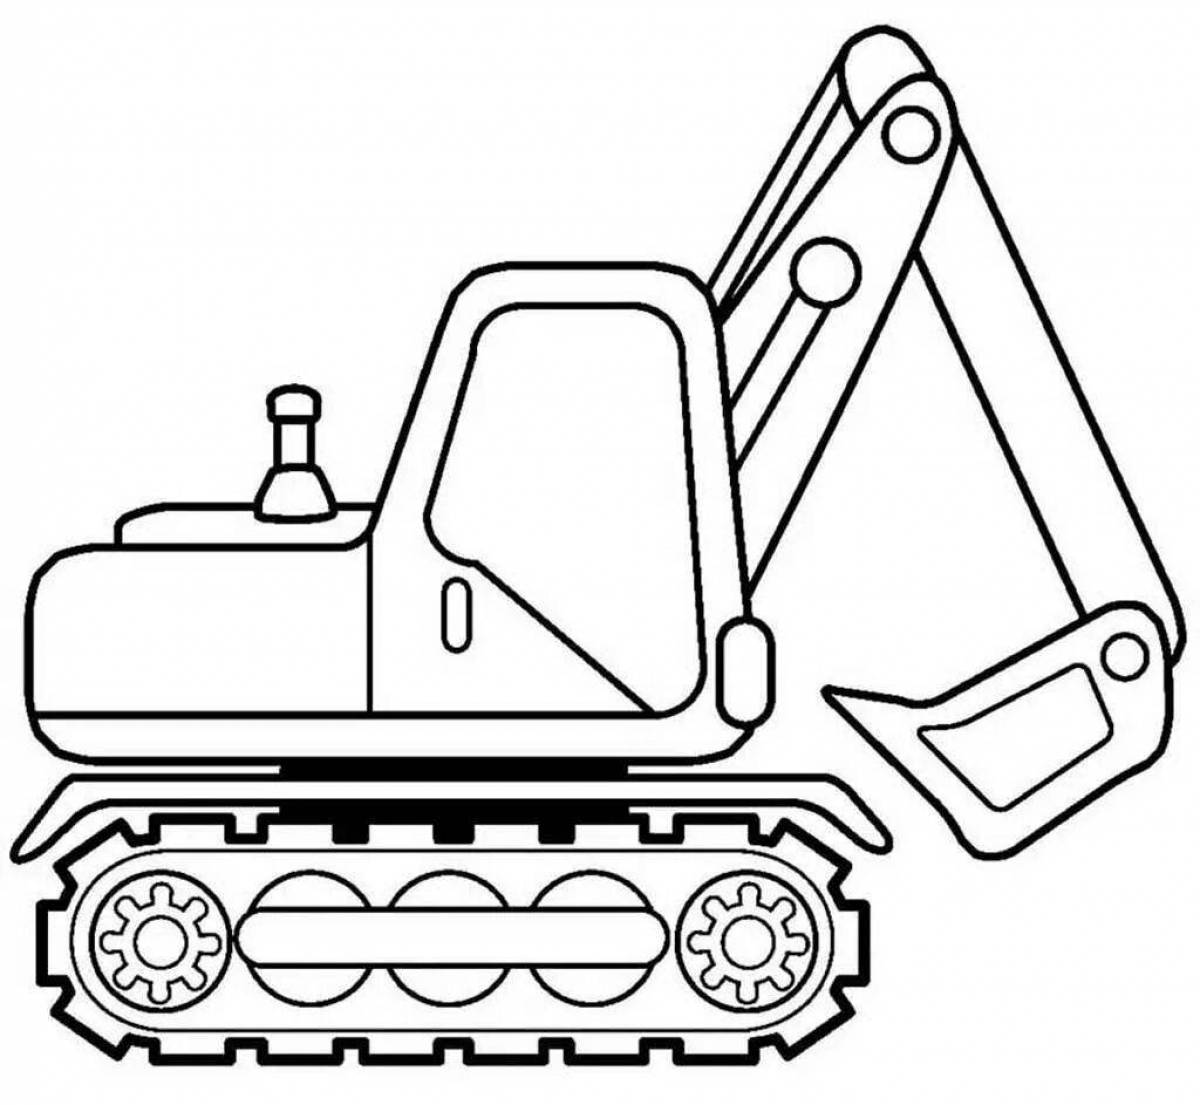 Fun coloring pages of construction vehicles for boys